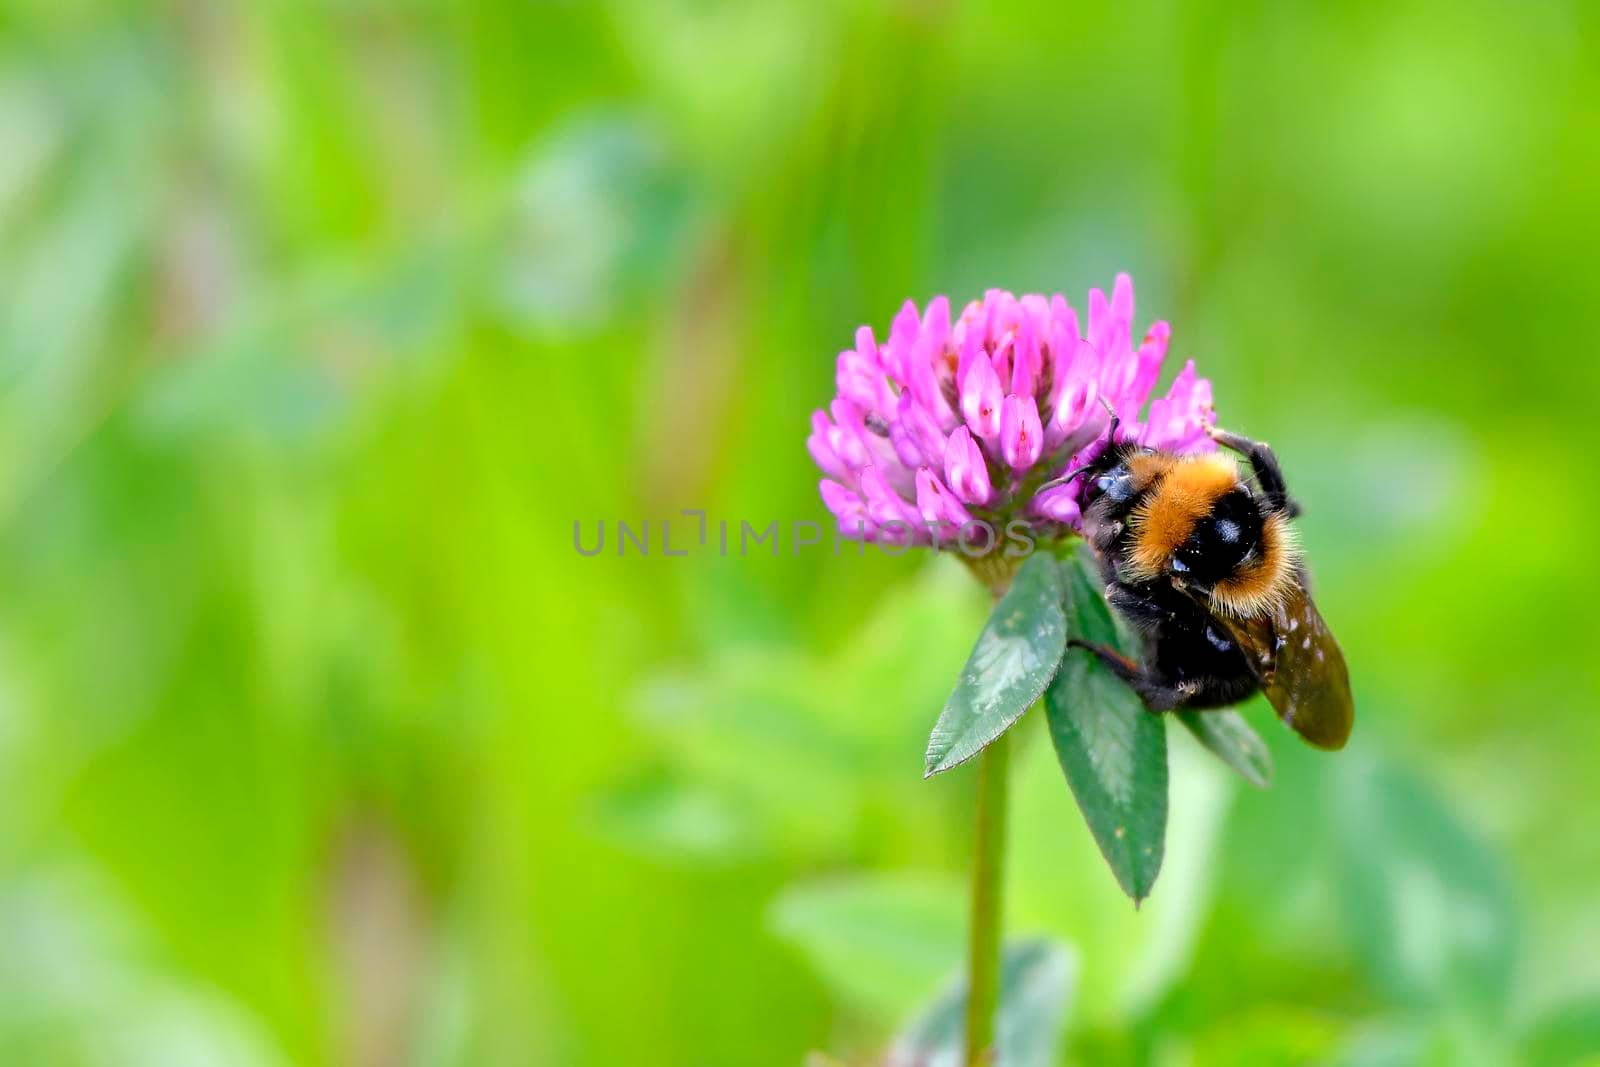 crimson clover with flower and red-tailed bumblebee